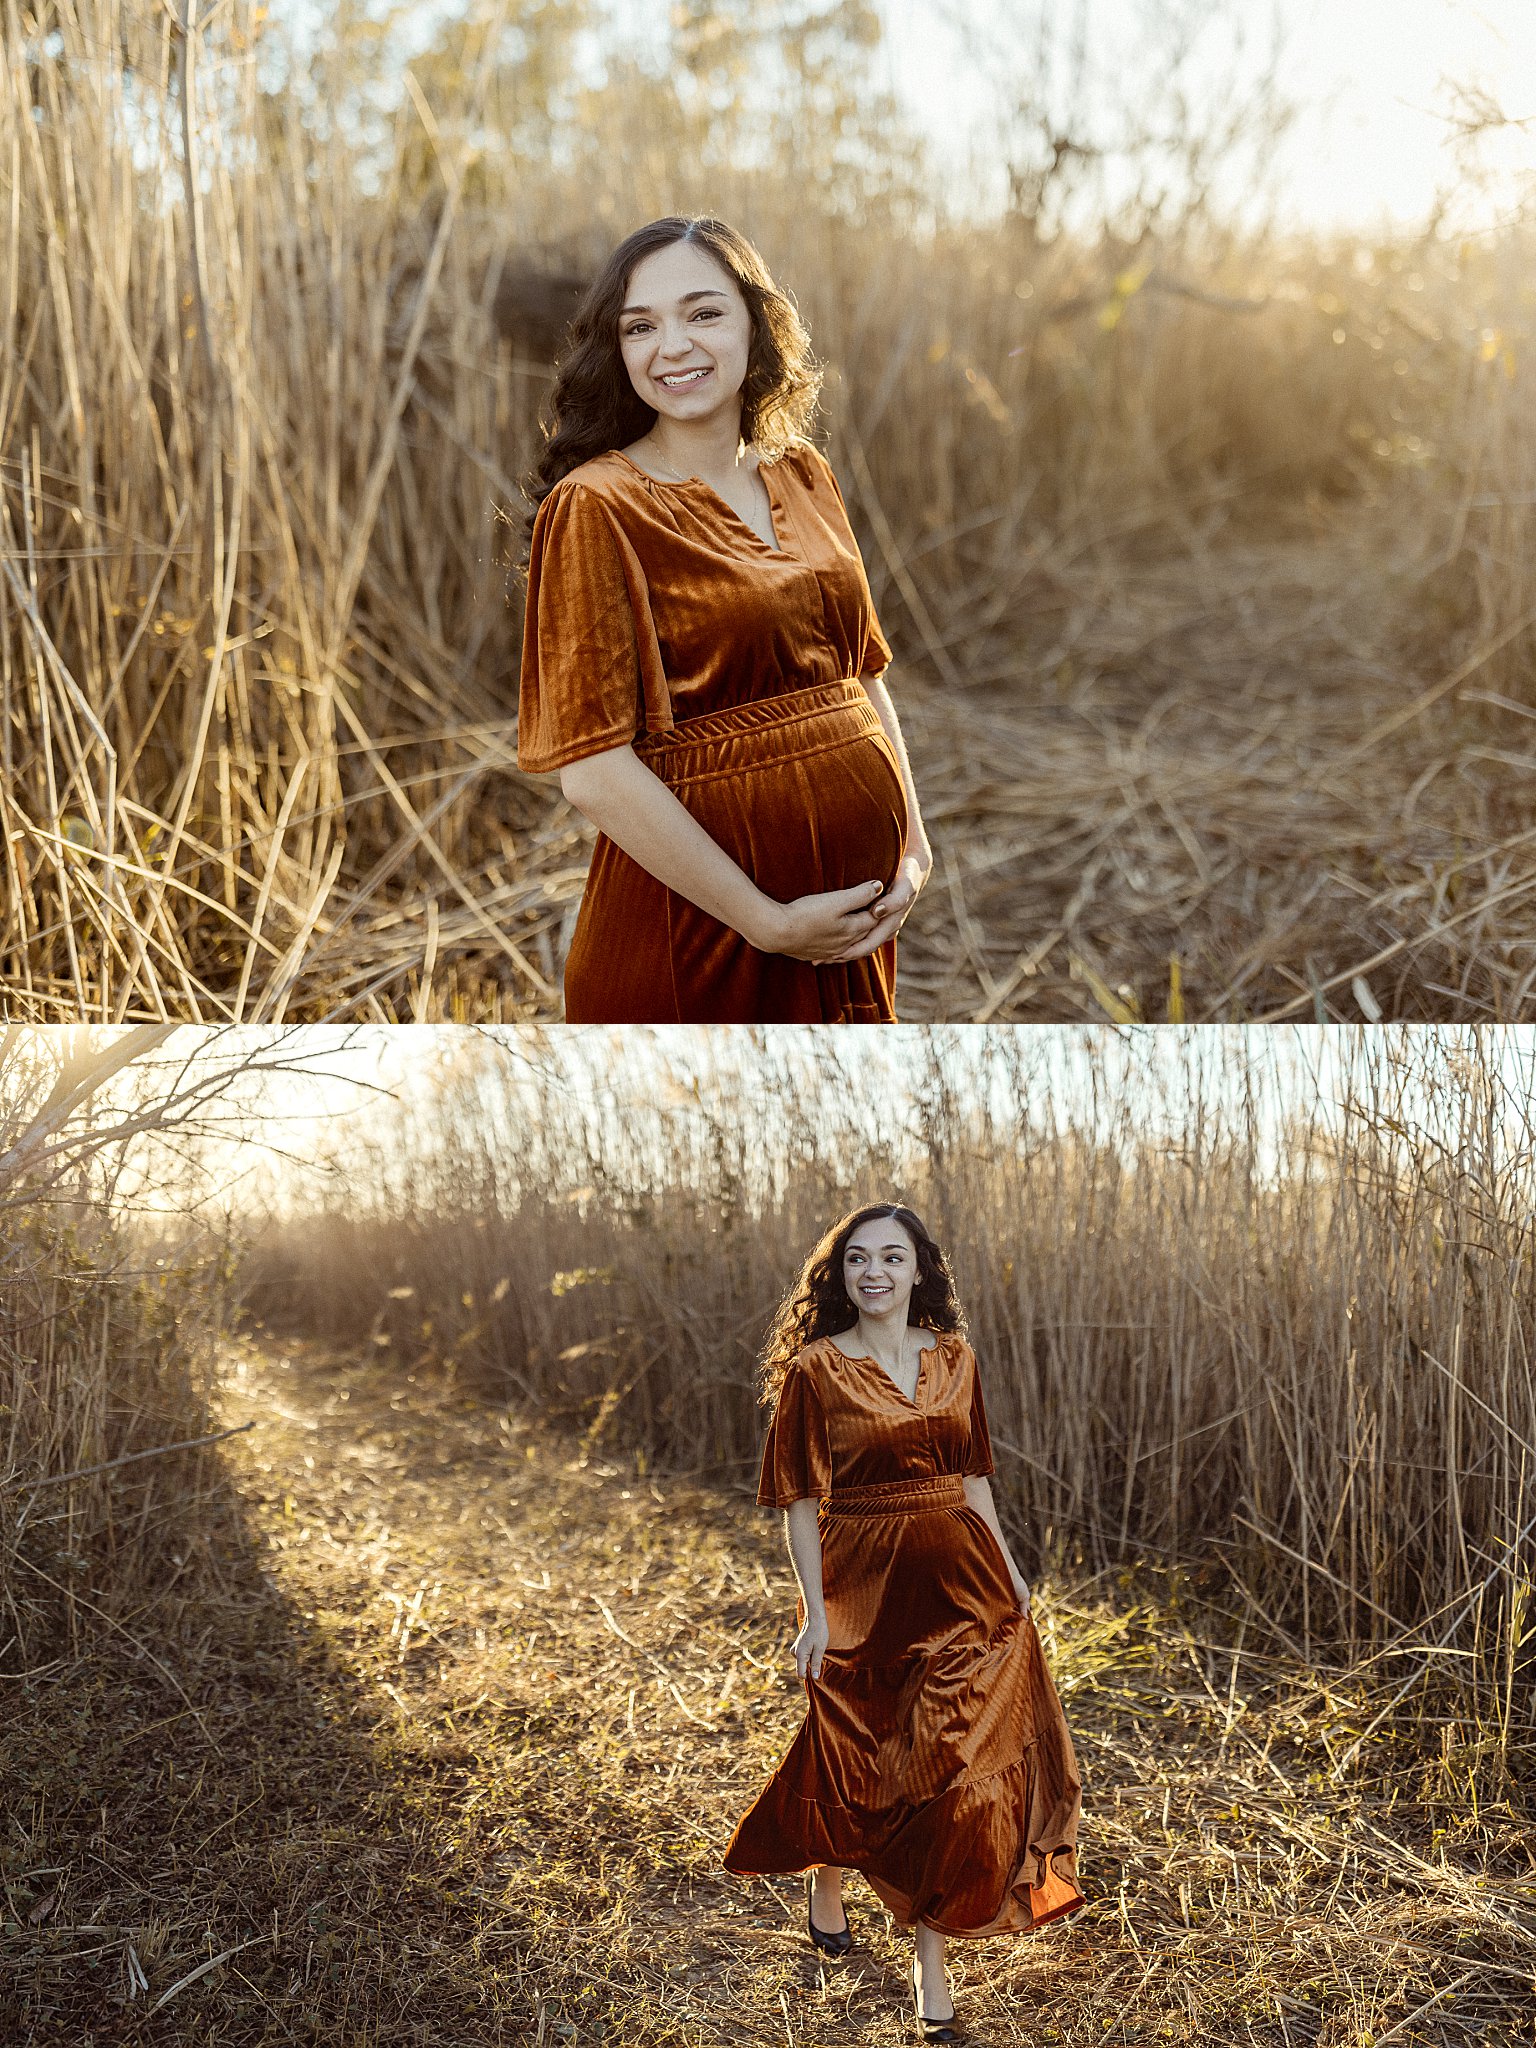 mom-to-be walks down path holding dress during Outdoor Maternity Session